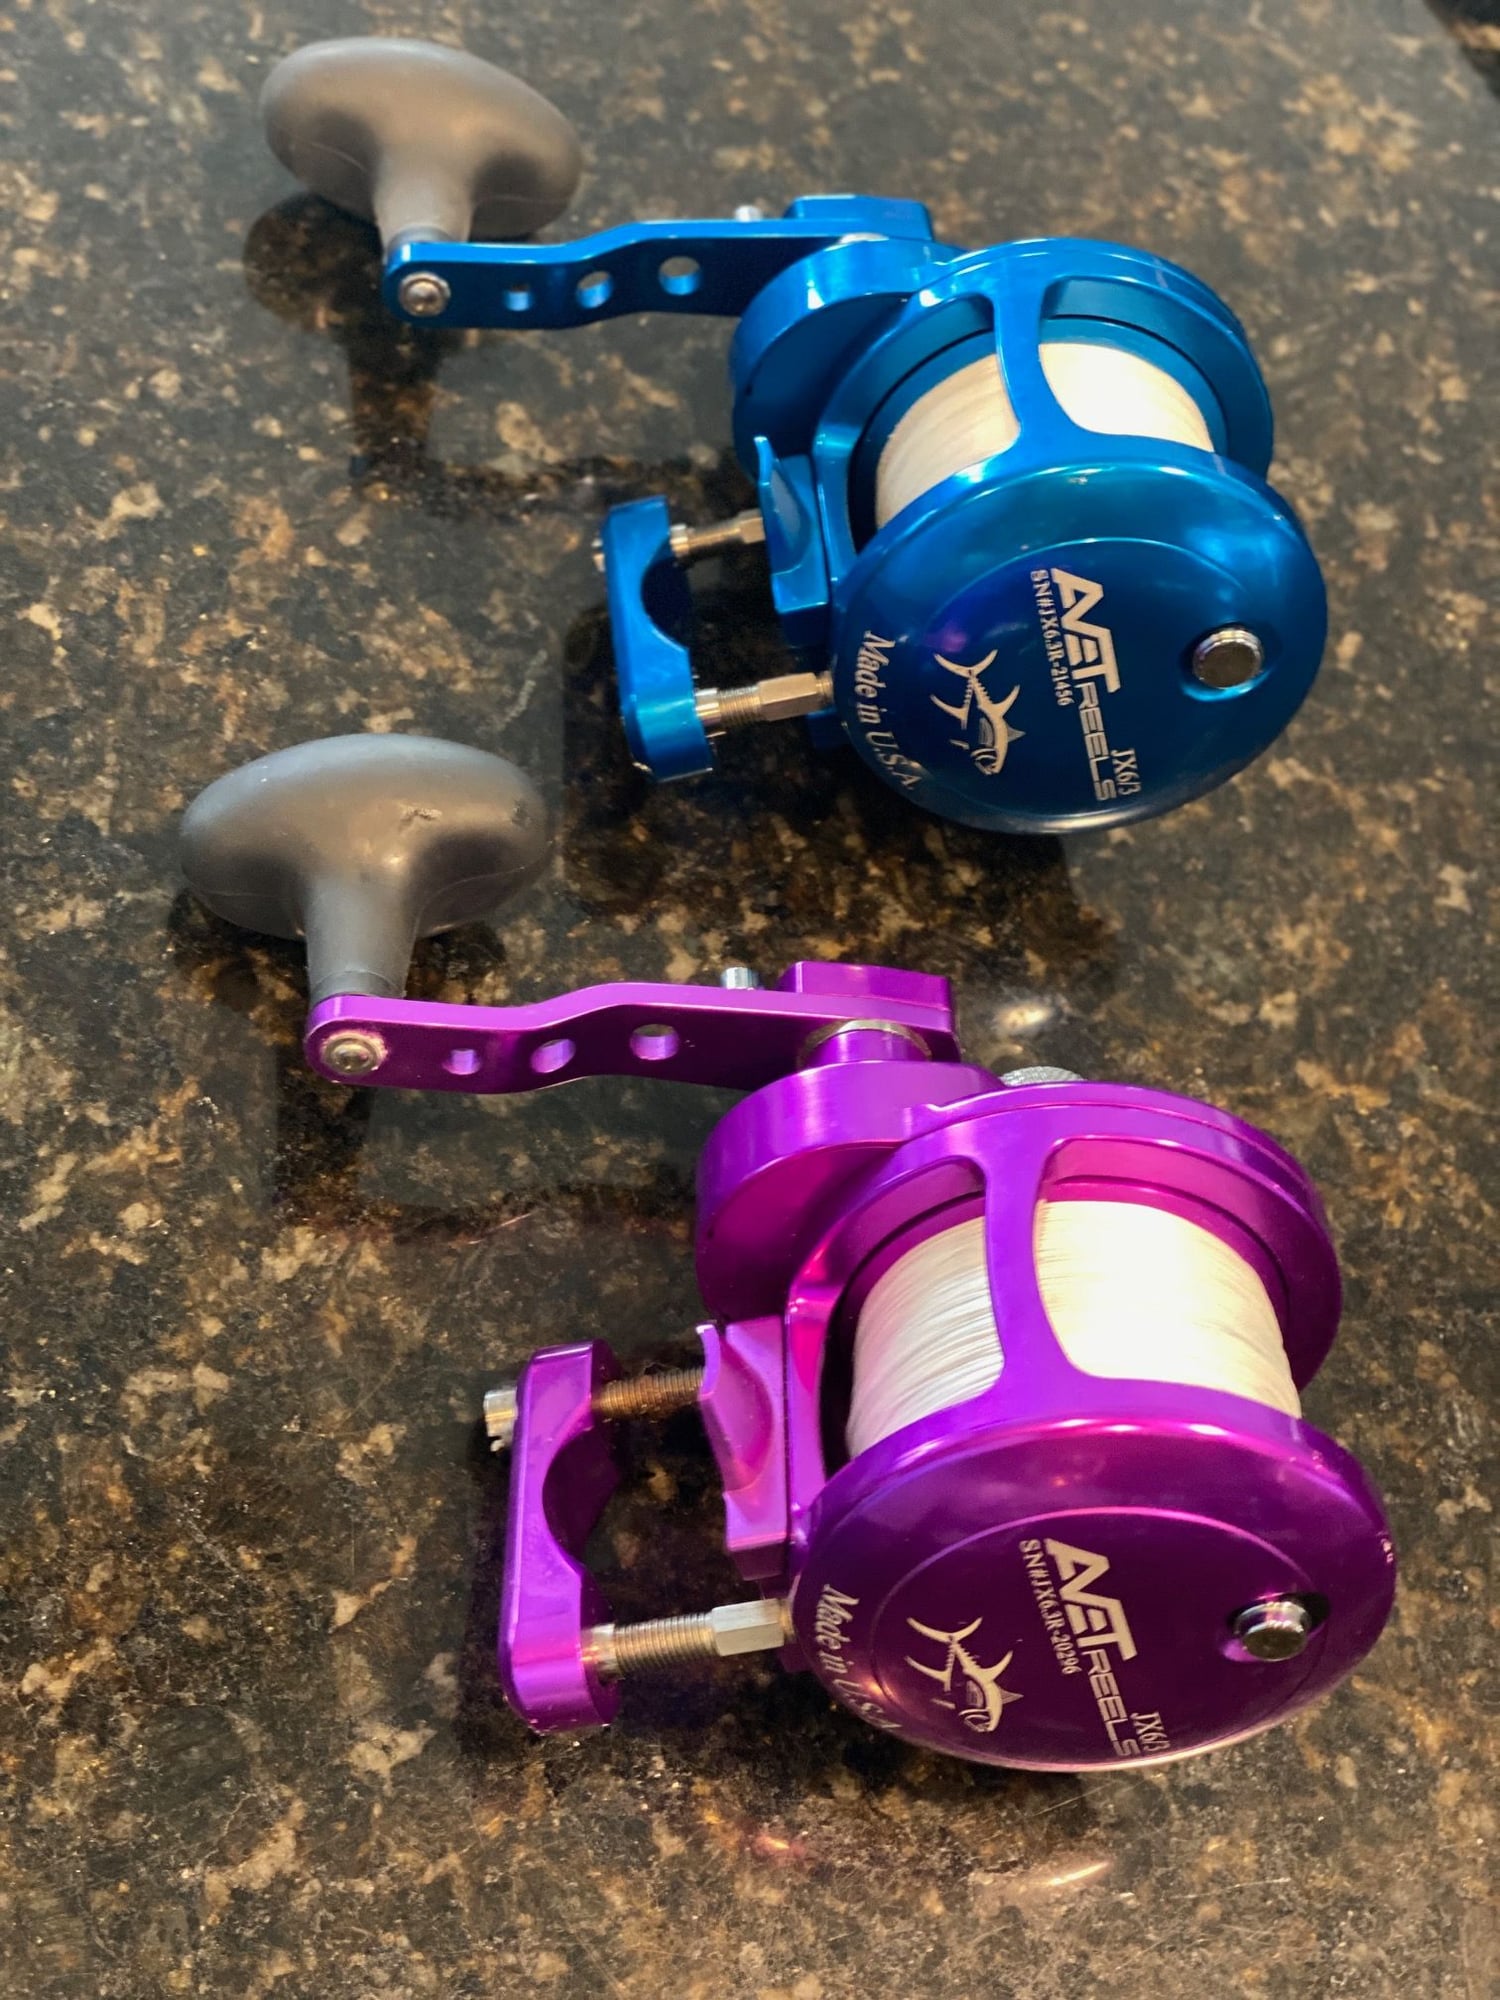 Avet jx 6/3 two speed reel for sale - The Hull Truth - Boating and Fishing  Forum